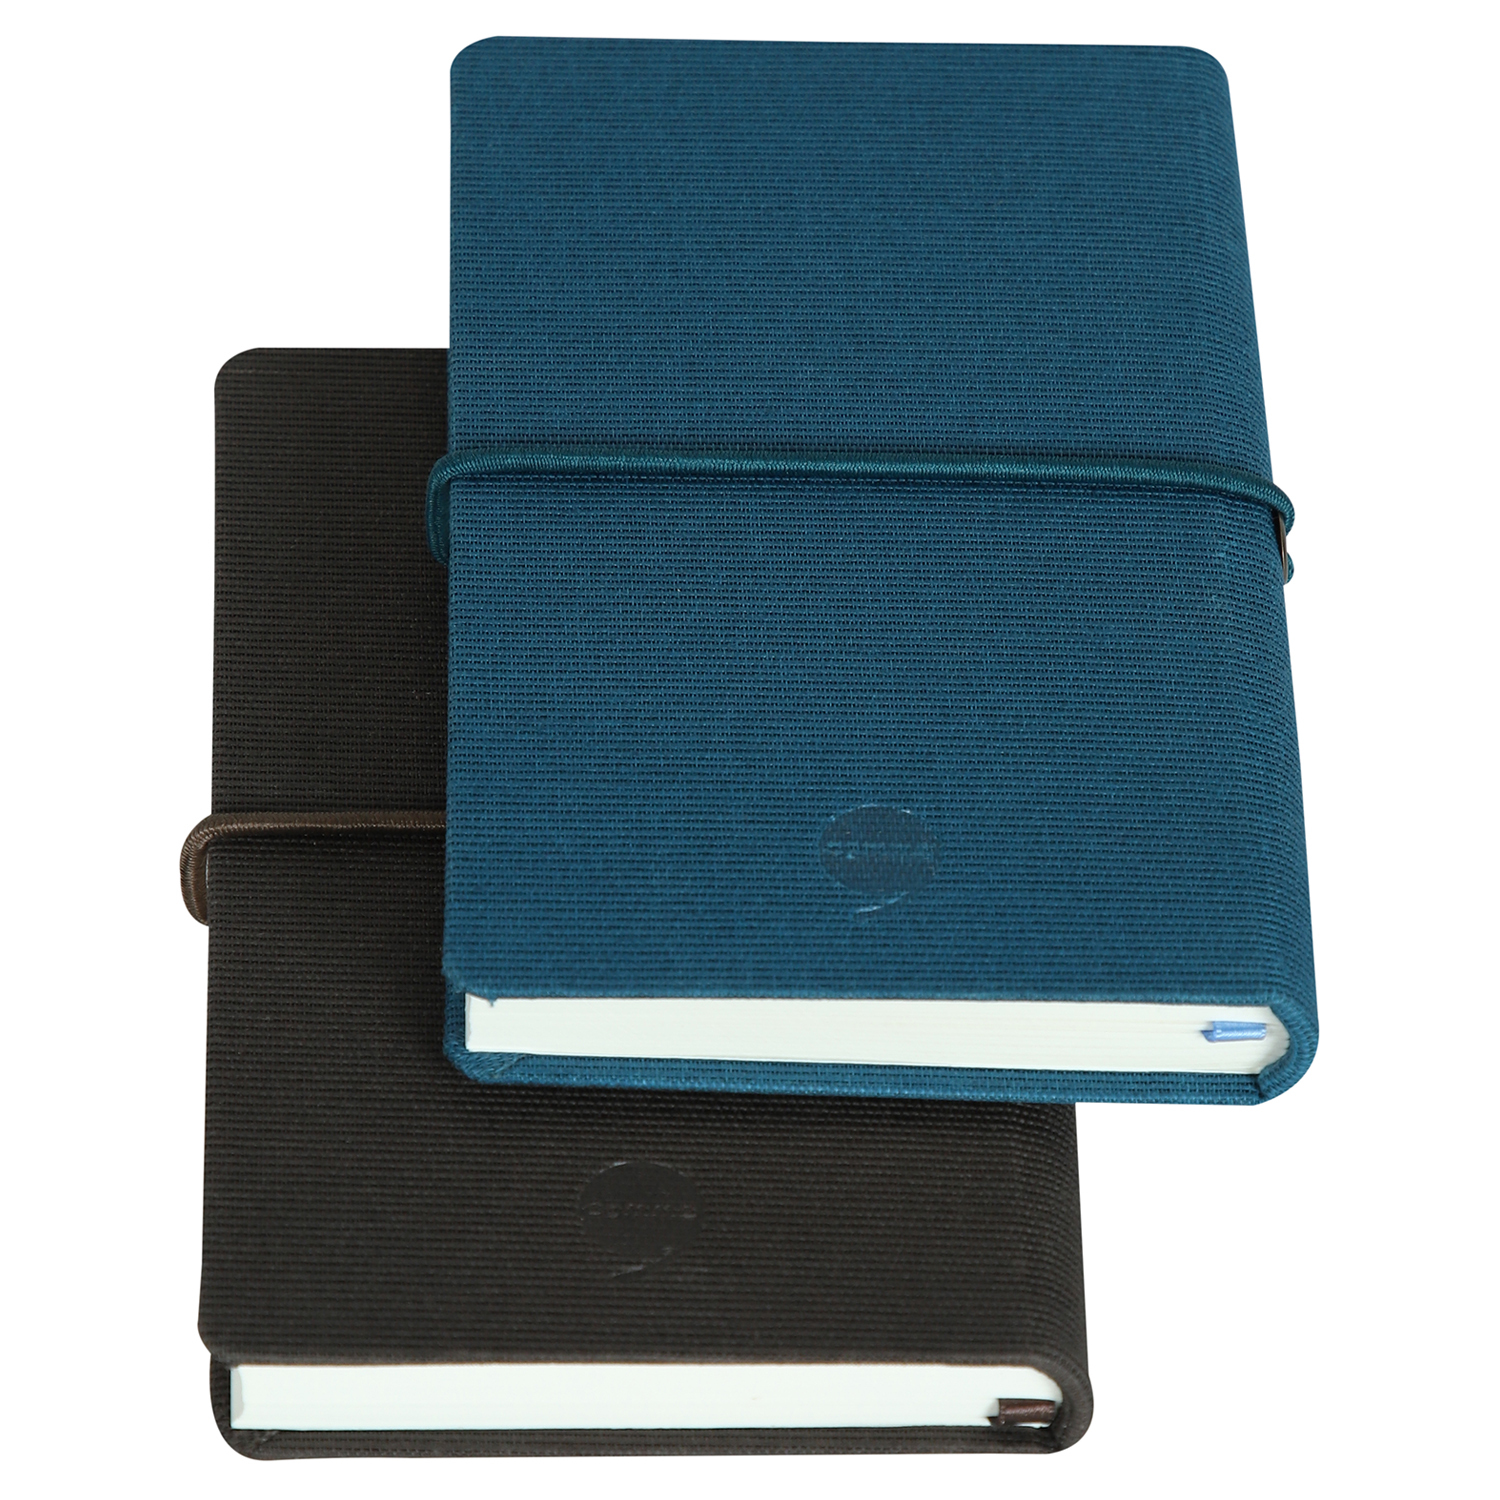 Comma Regina - A6 Size - Hard Bound Notebook (Brown and Peacock Blue))